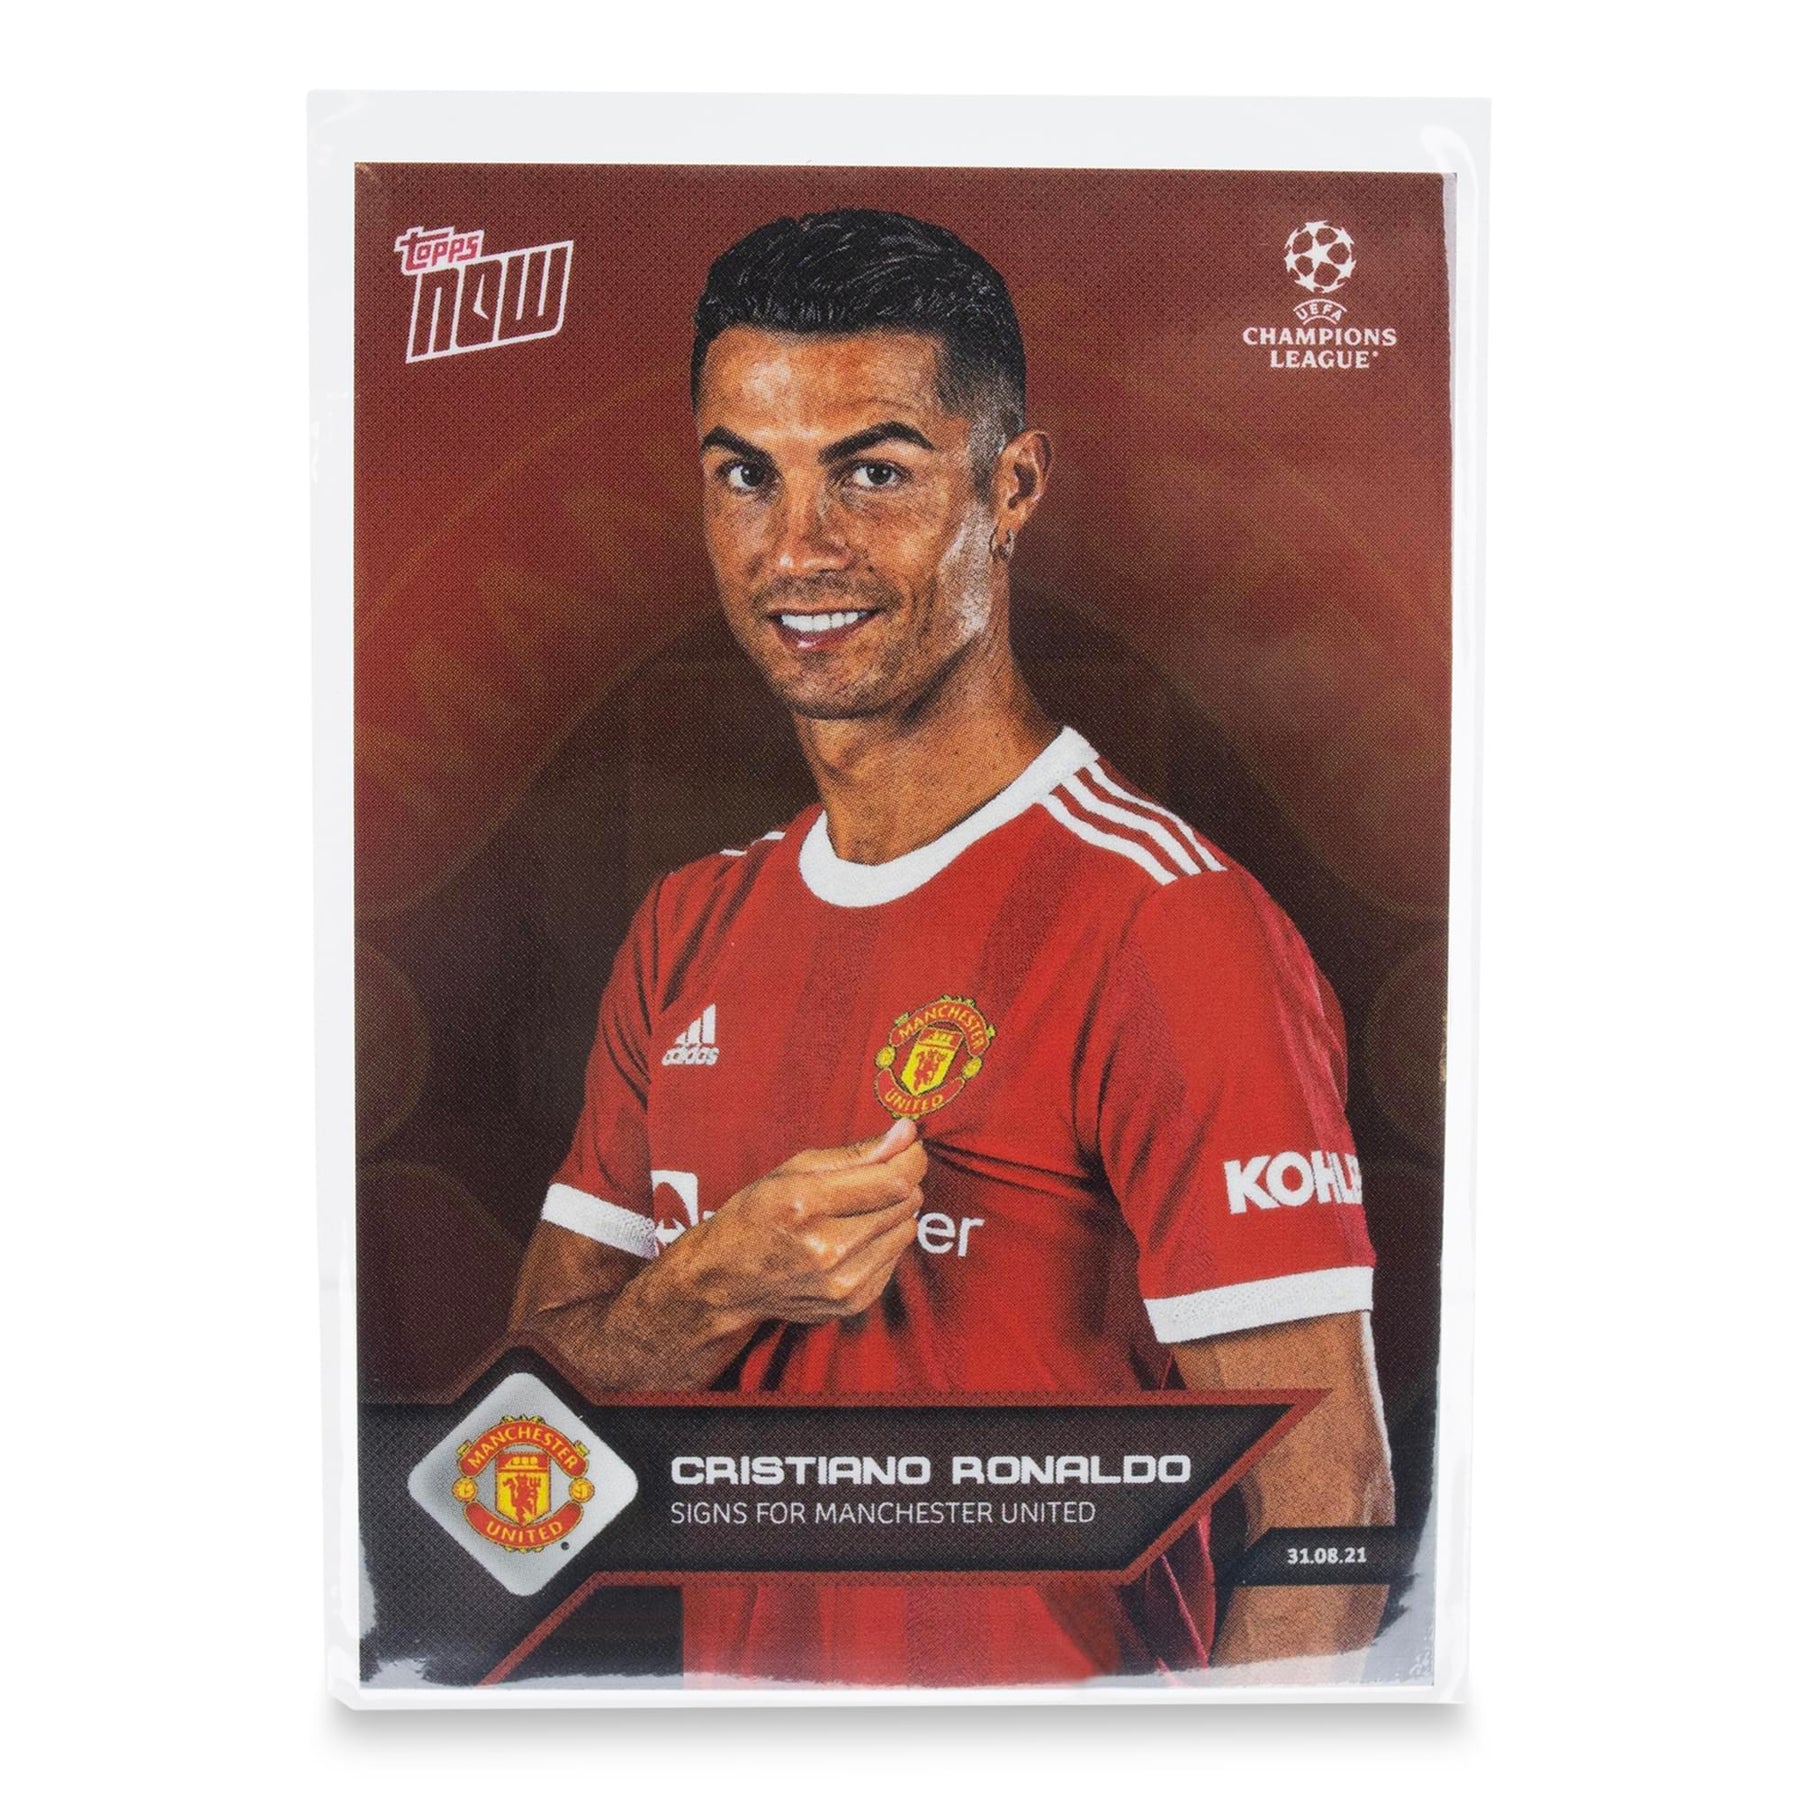 UCL TOPPS NOW Card #14 | Cristiano Ronaldo Signs for Manchester United